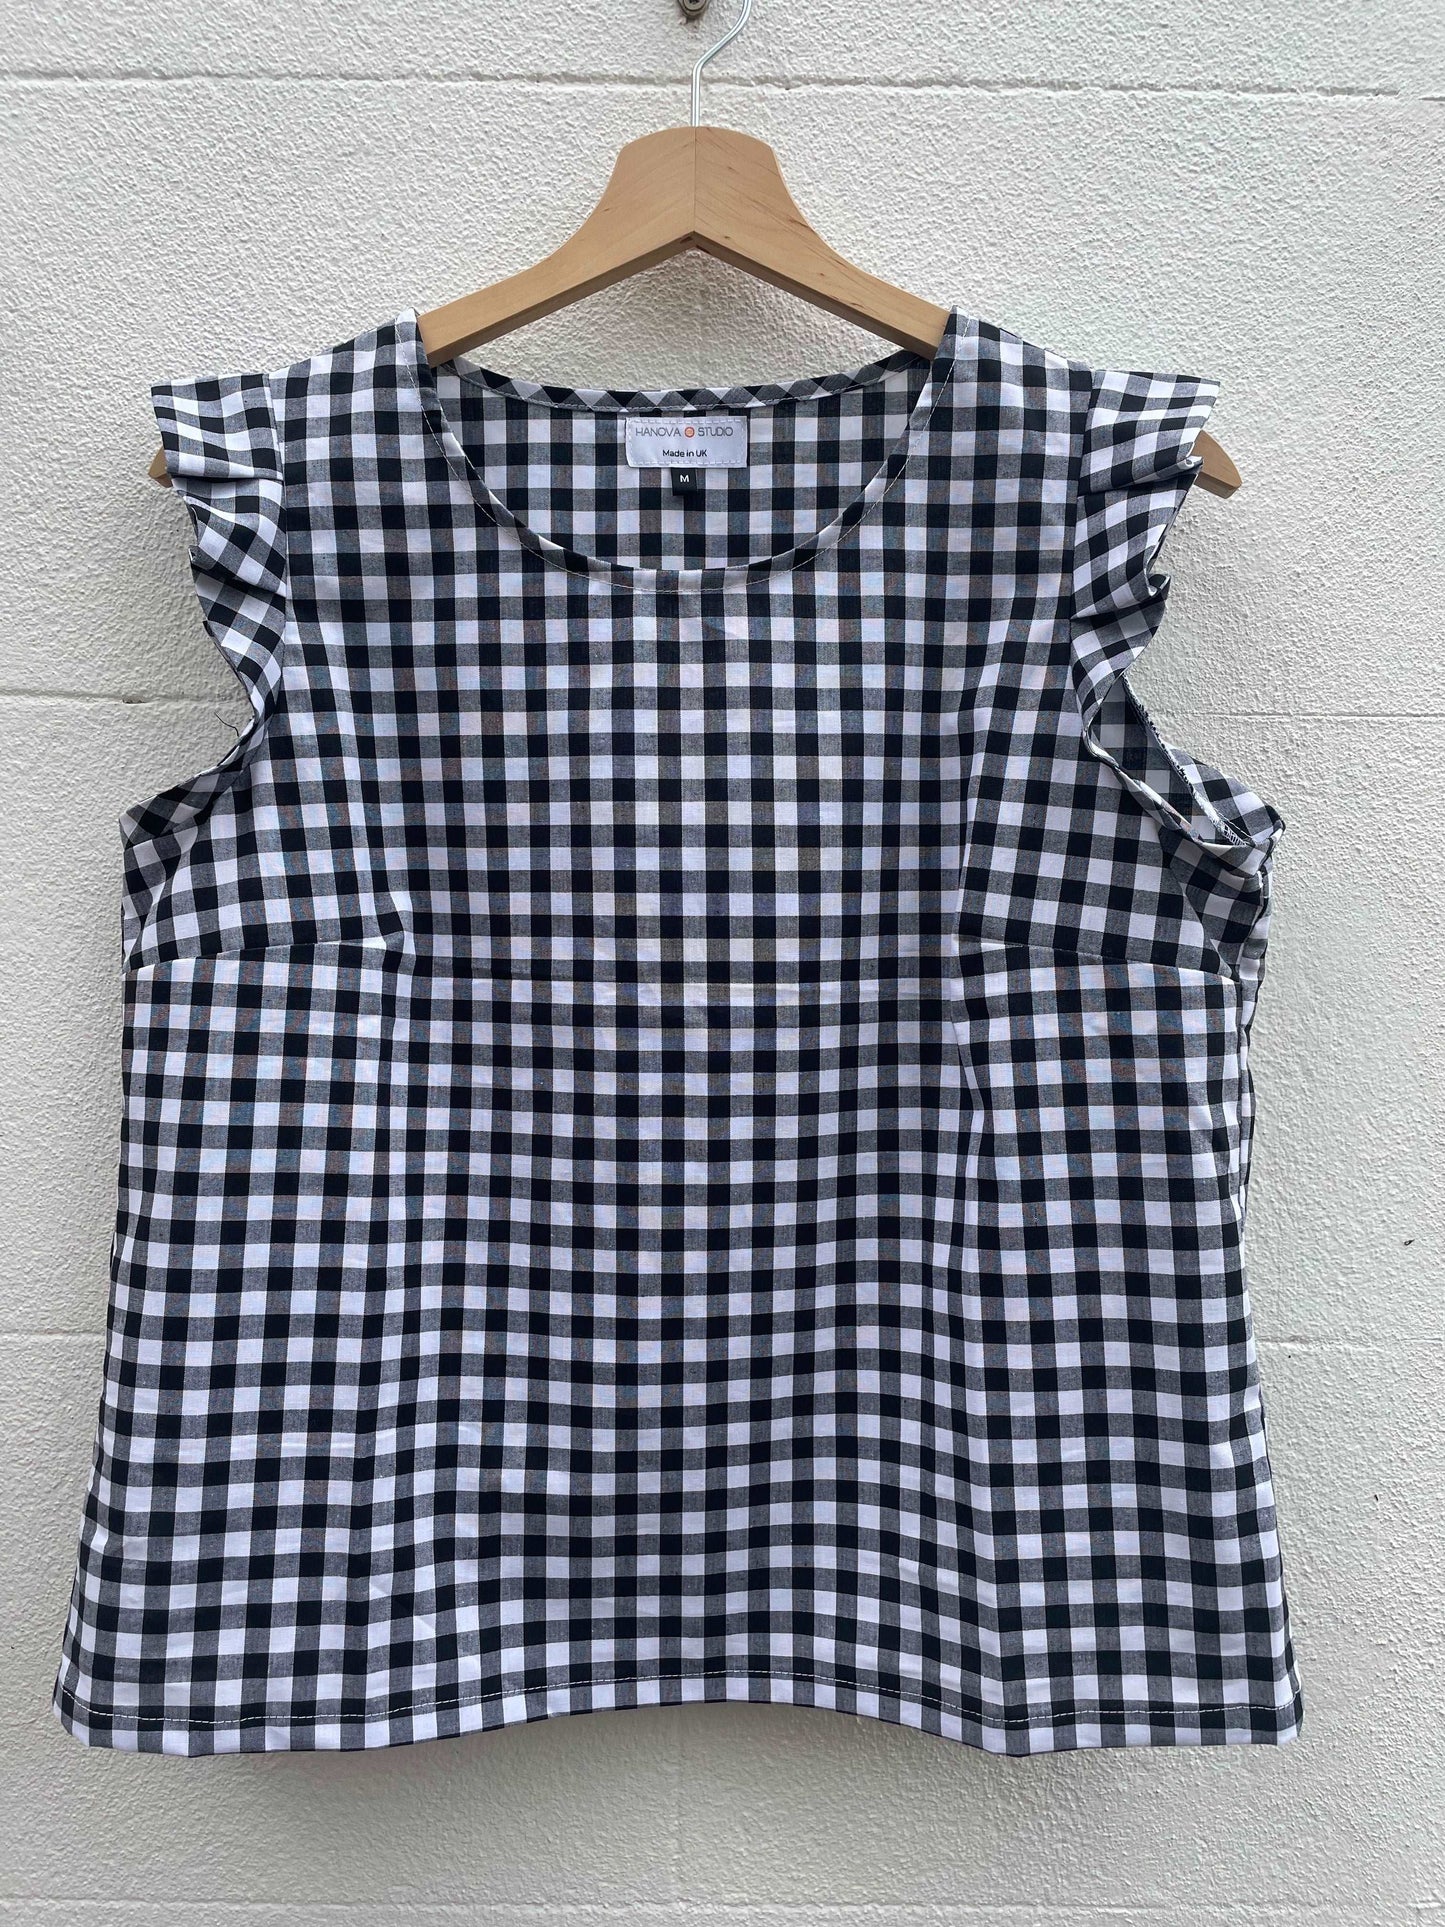 black and white gingham frill sleeve top affordable sustainable clothing